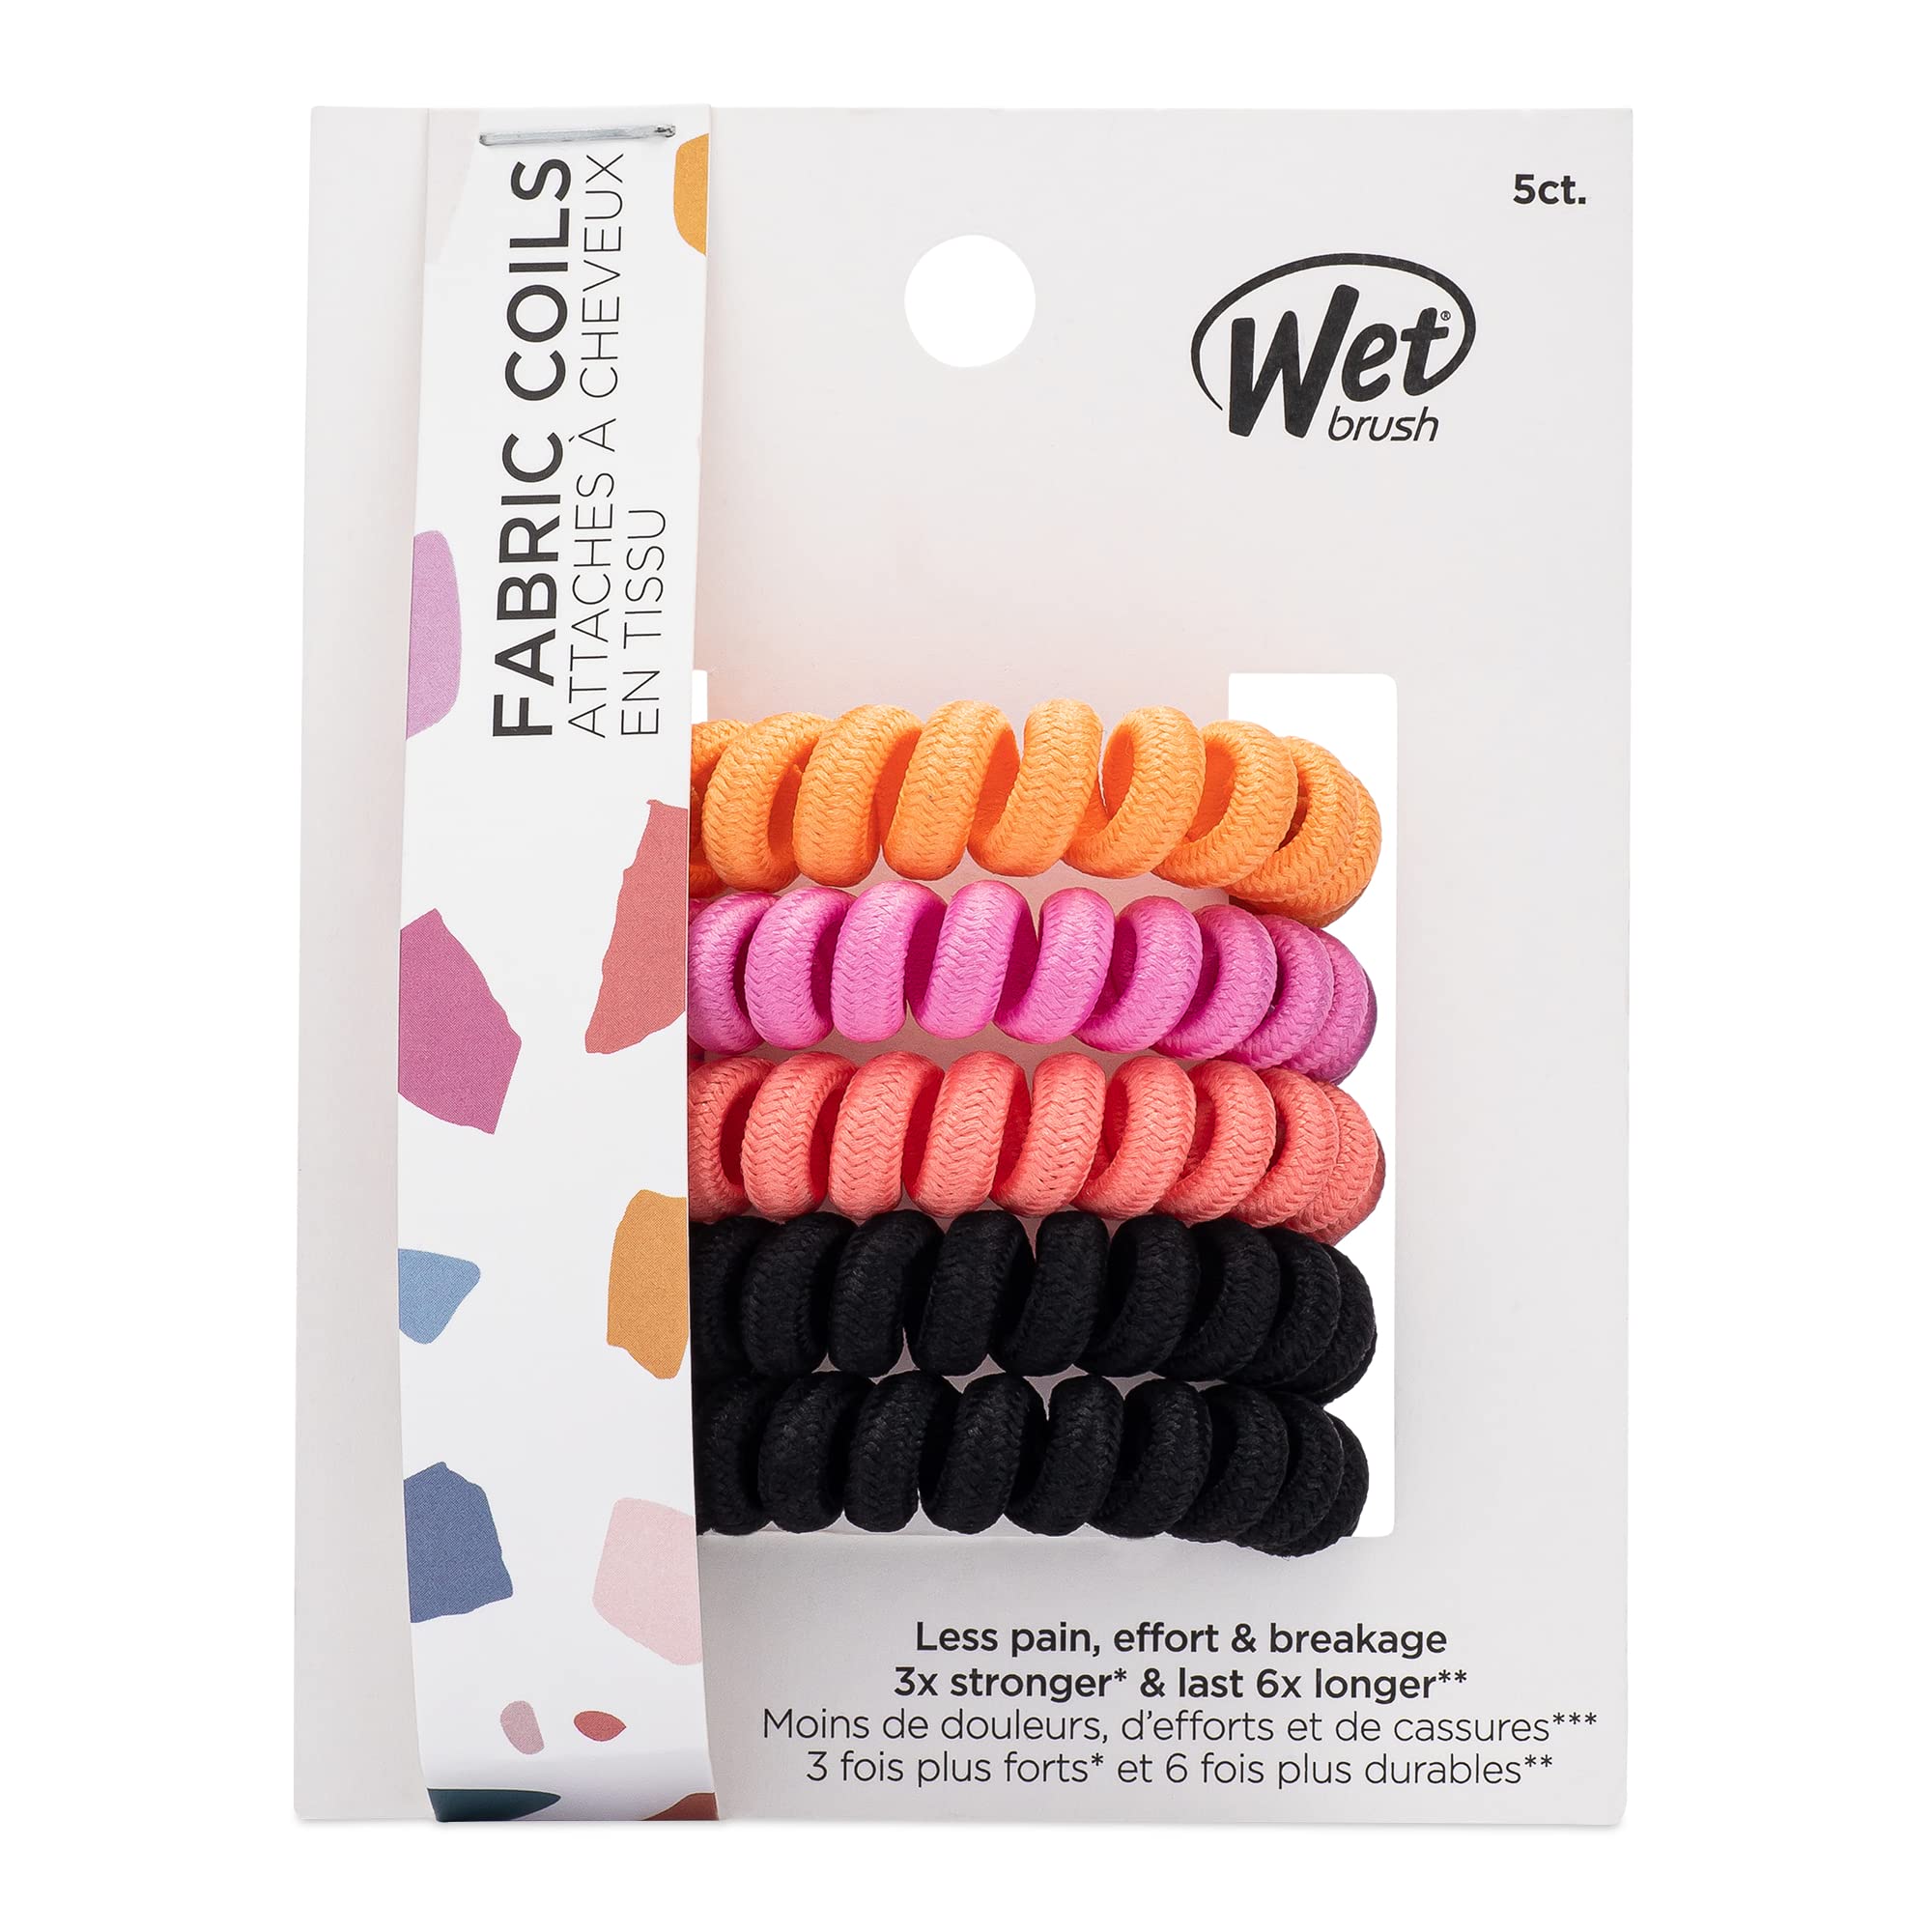 5-Count Wet Brush Fabric Coil Pain-Free Hair Elastics (Pink) $2.65 ($0.53 each) + Free Shipping w/ Prime or on $35+